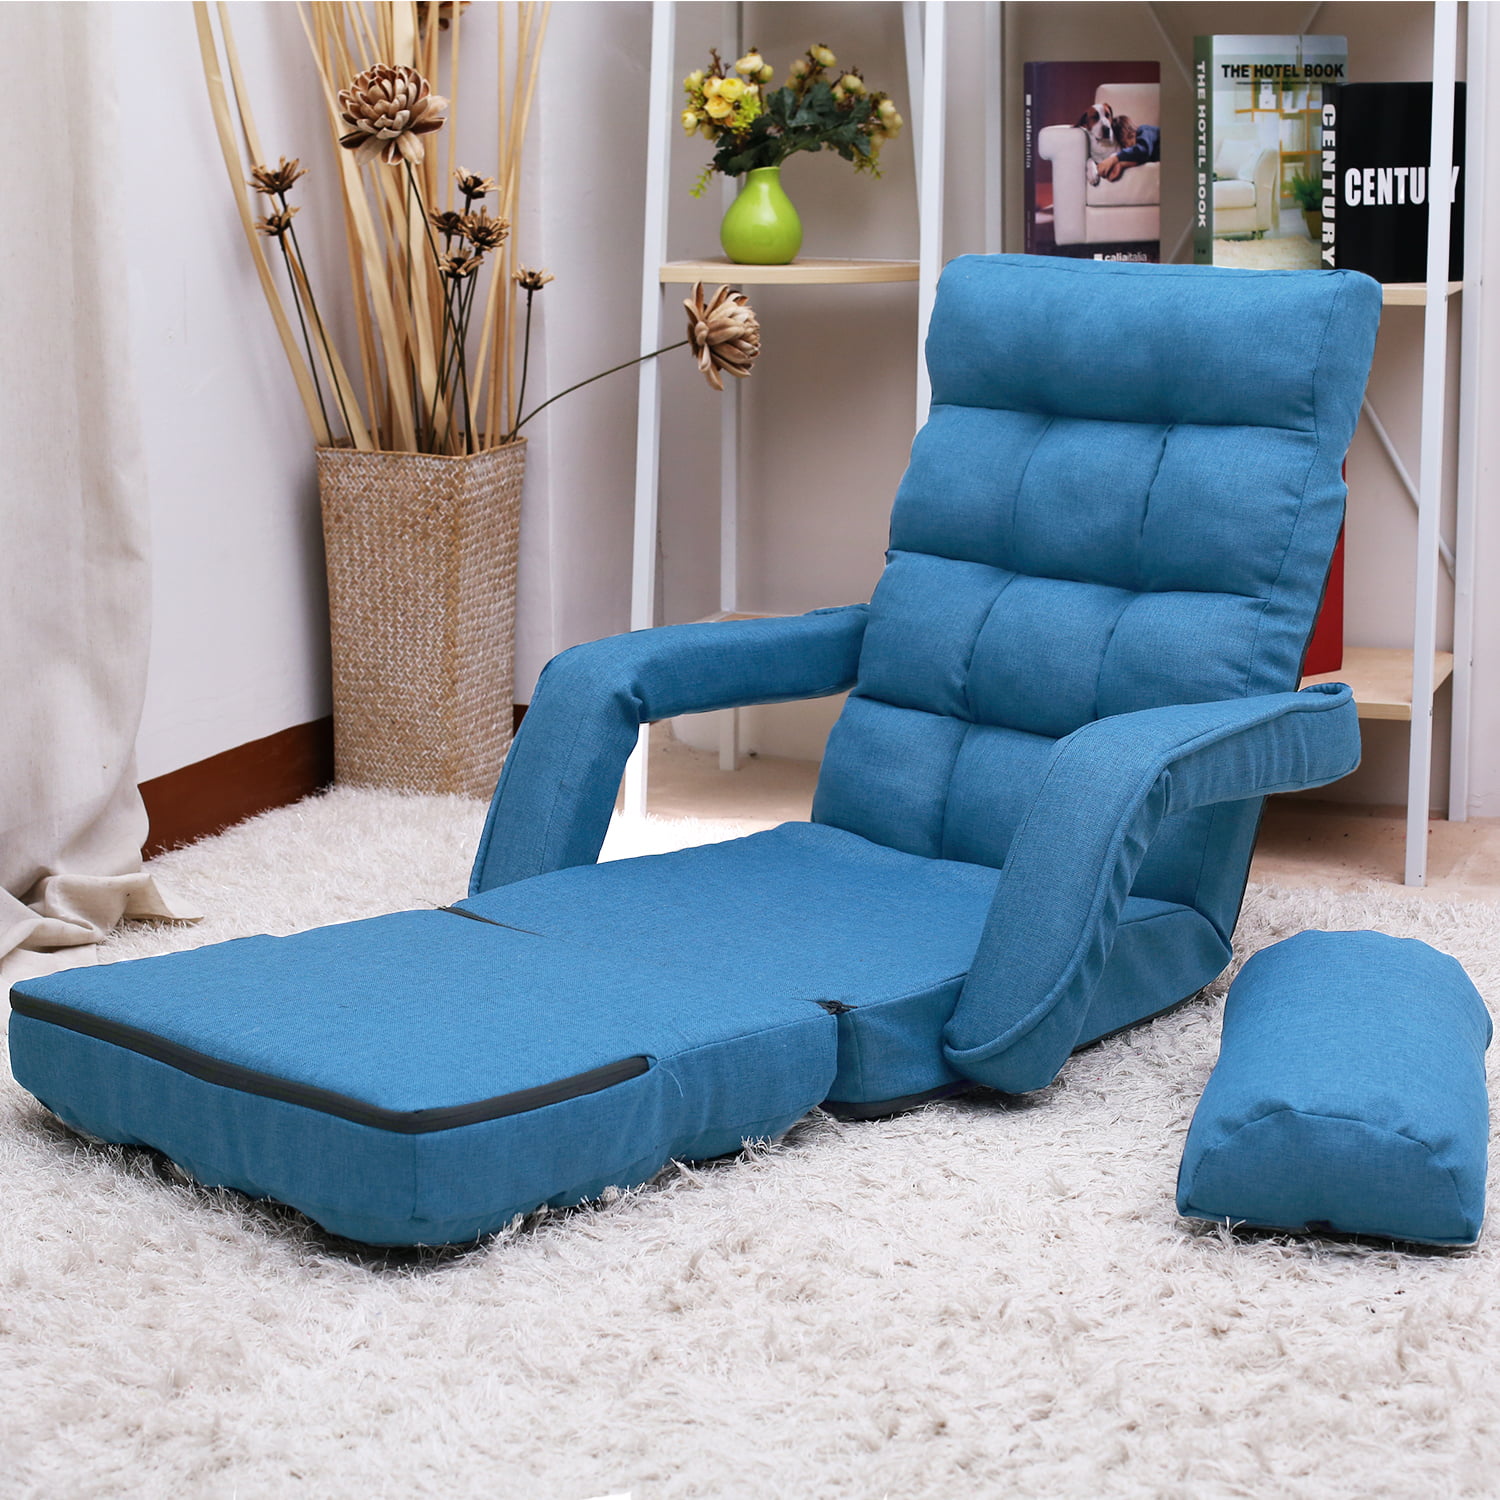 Lazy Couch Floor Chair 5-Position Adjustable Floor Gaming Lounge Sofa Seat Home